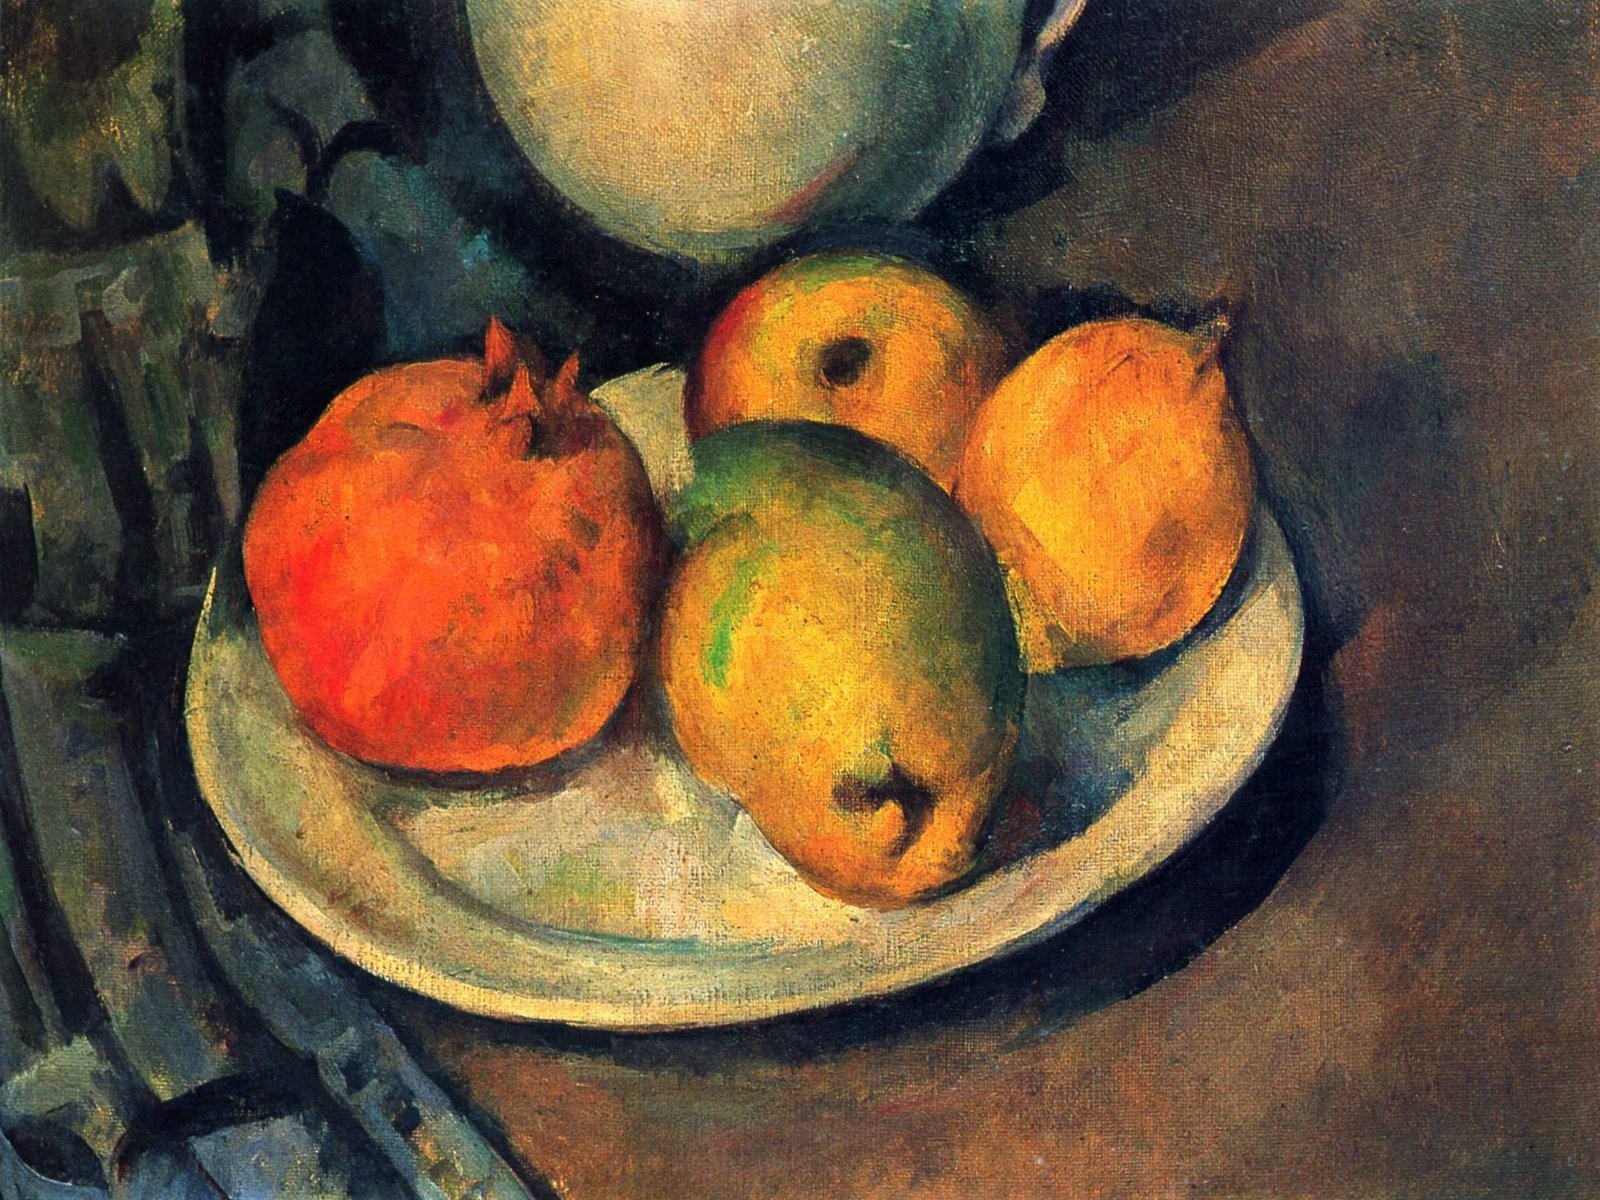 still, Life, Pomegranate, And, Pears, By, Paul, Cezanne Wallpaper